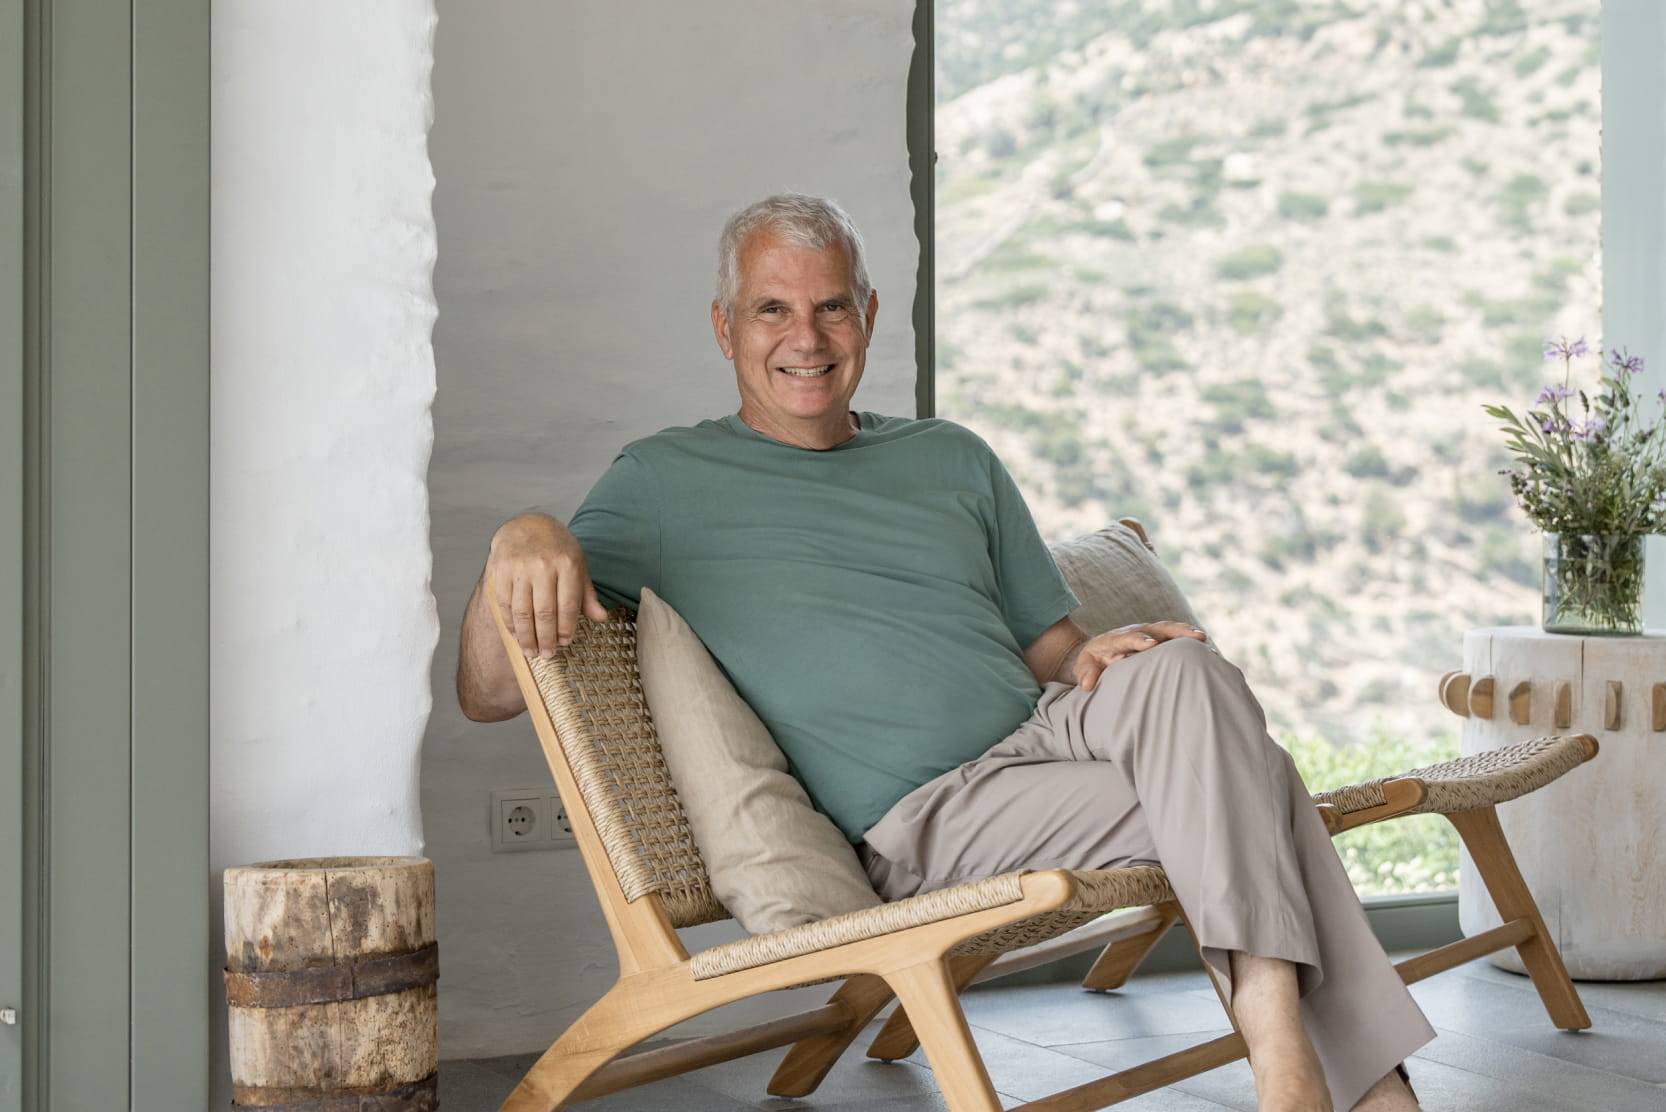 Pastoral allure at Villa Thola: Interview with Christos Kavathas